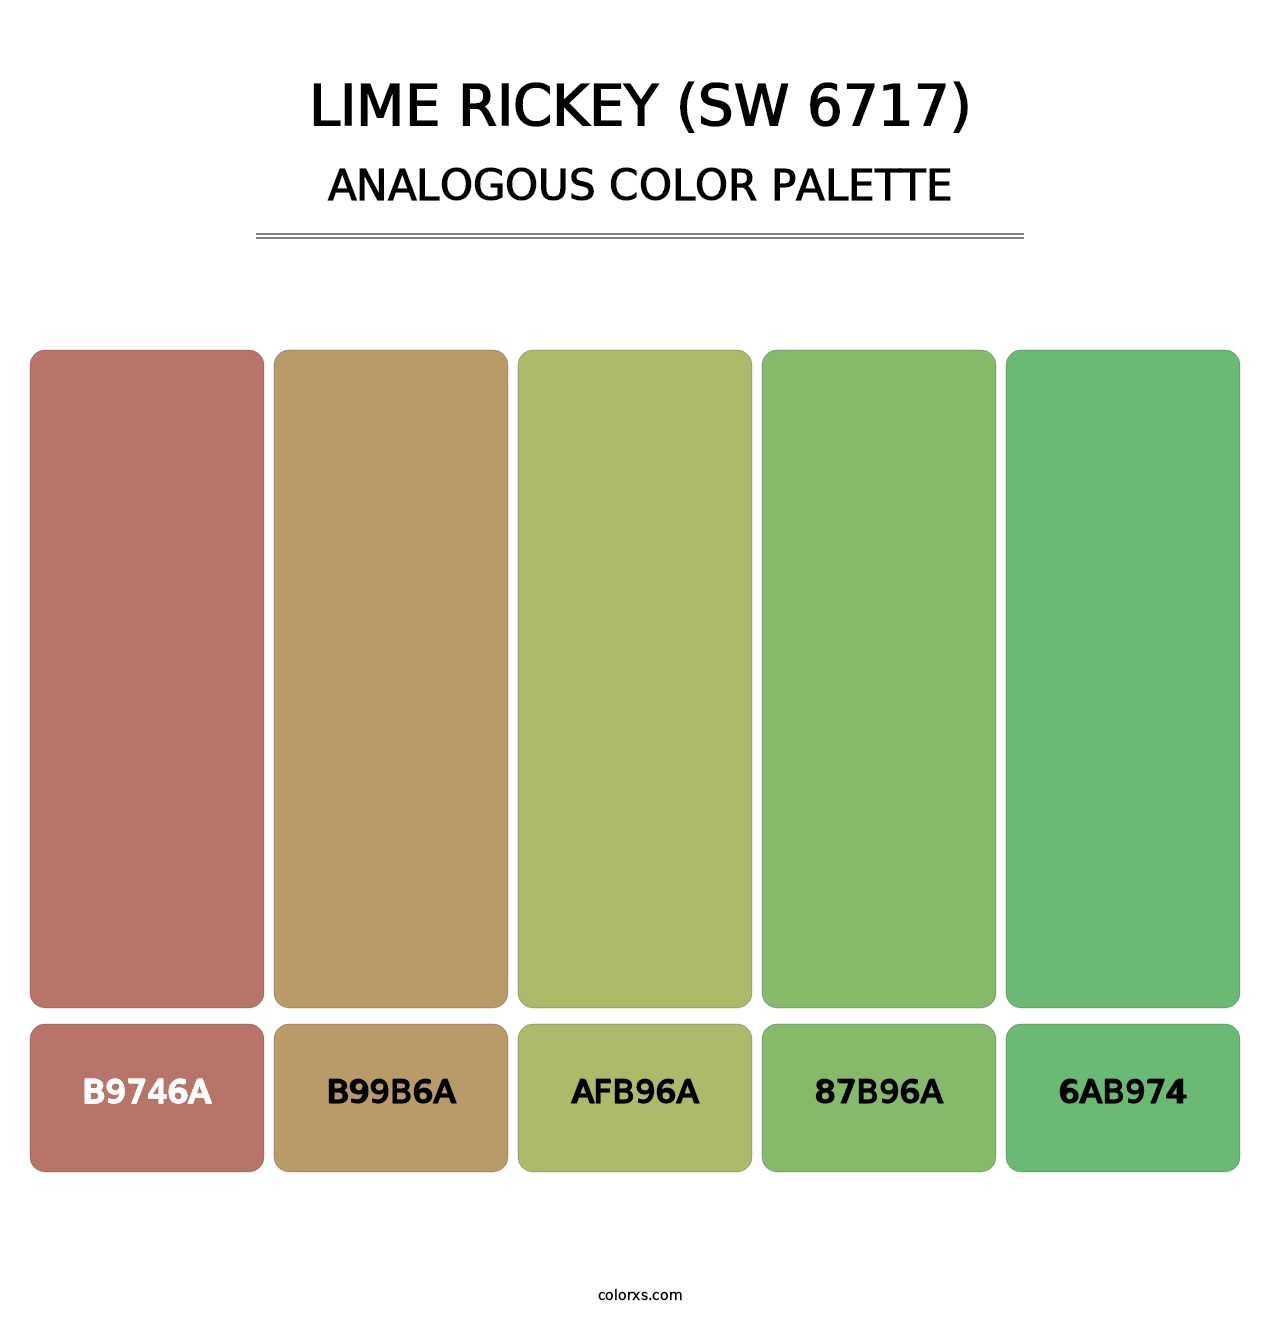 Lime Rickey (SW 6717) - Analogous Color Palette